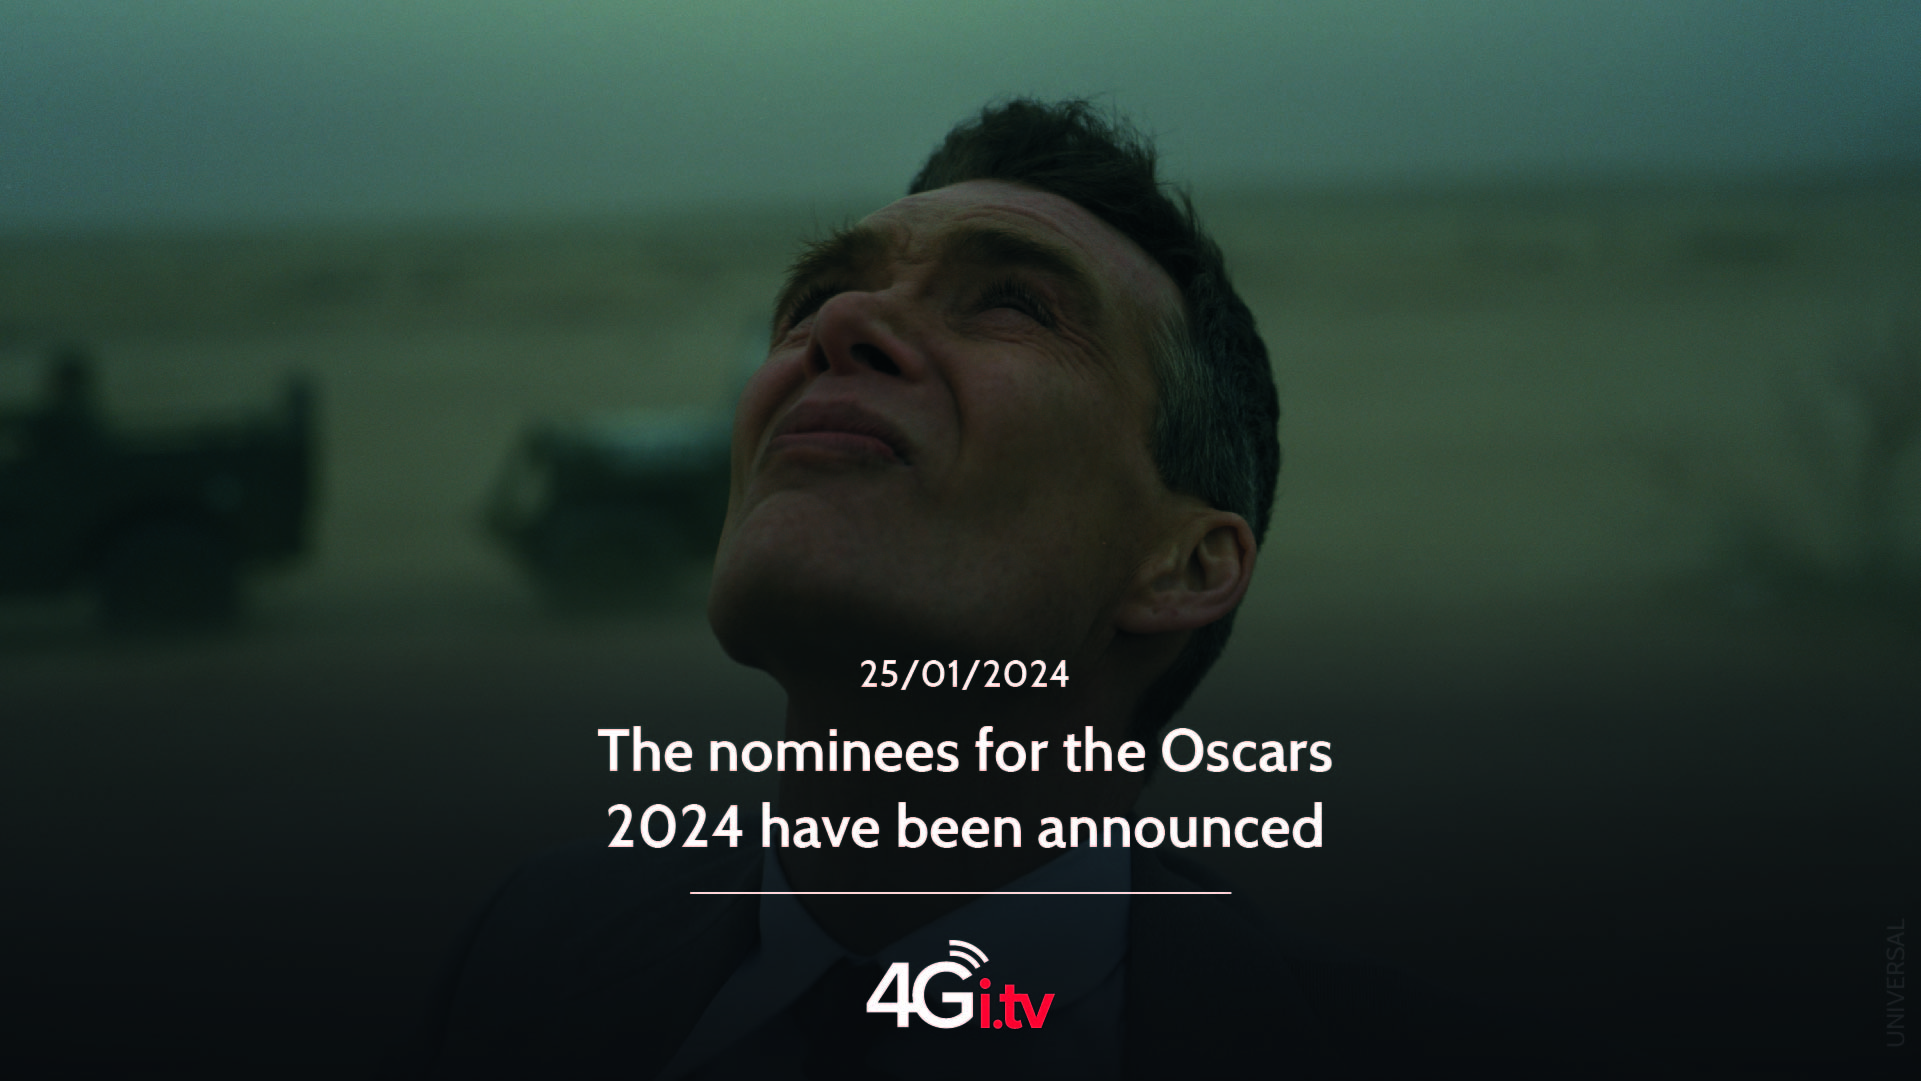 Подробнее о статье The nominees for the Oscars 2024 have been announced